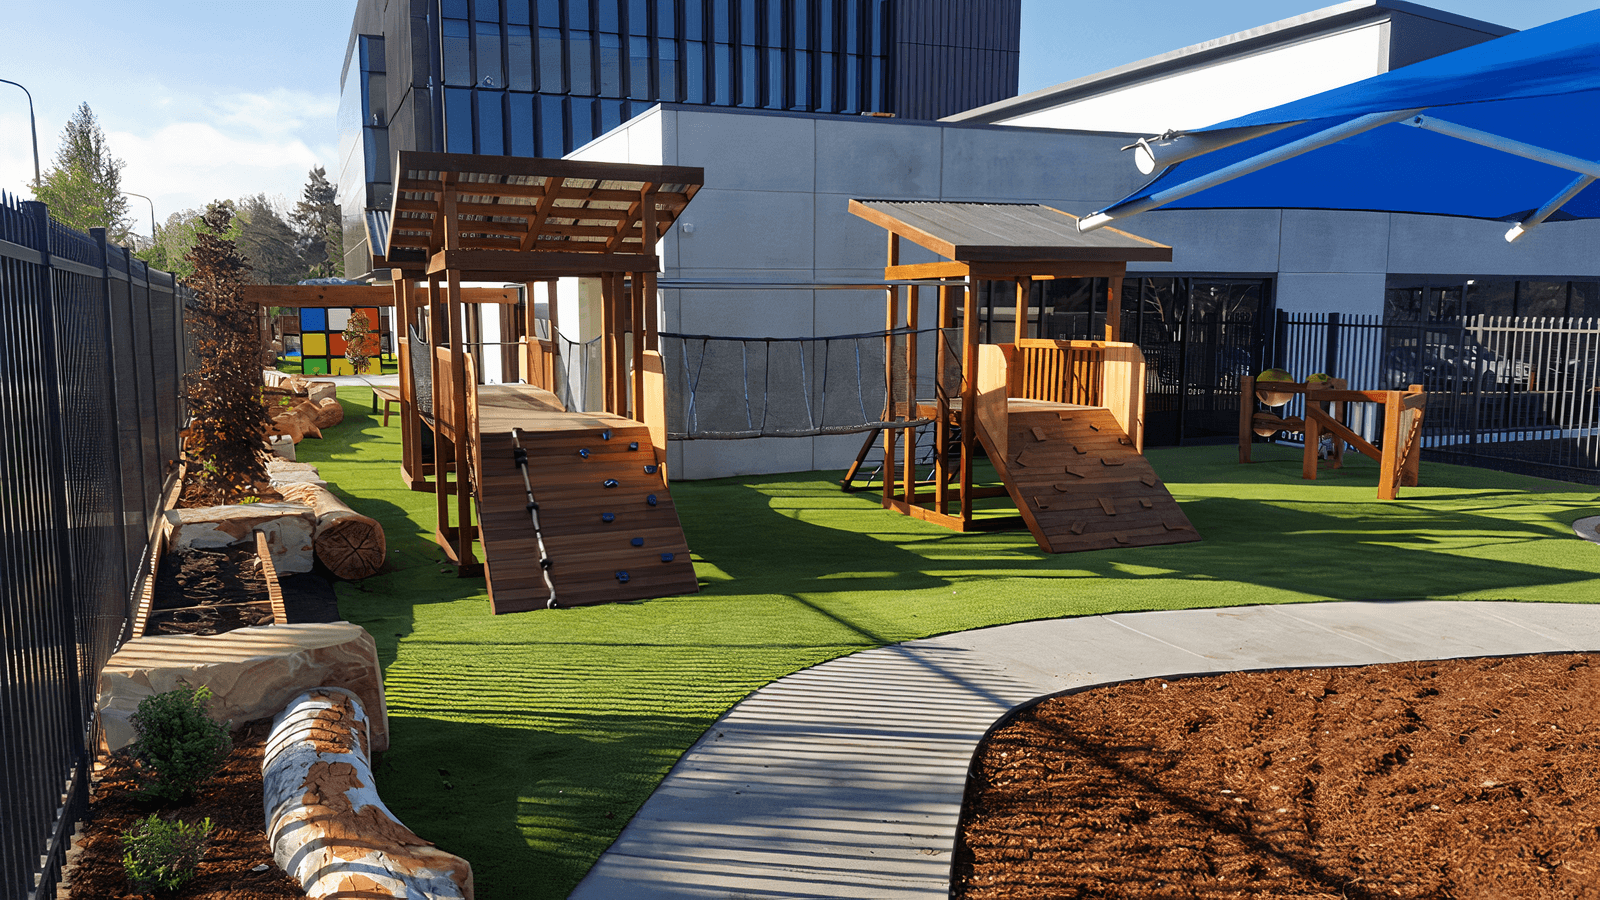 Outdoor play area with artifical turf